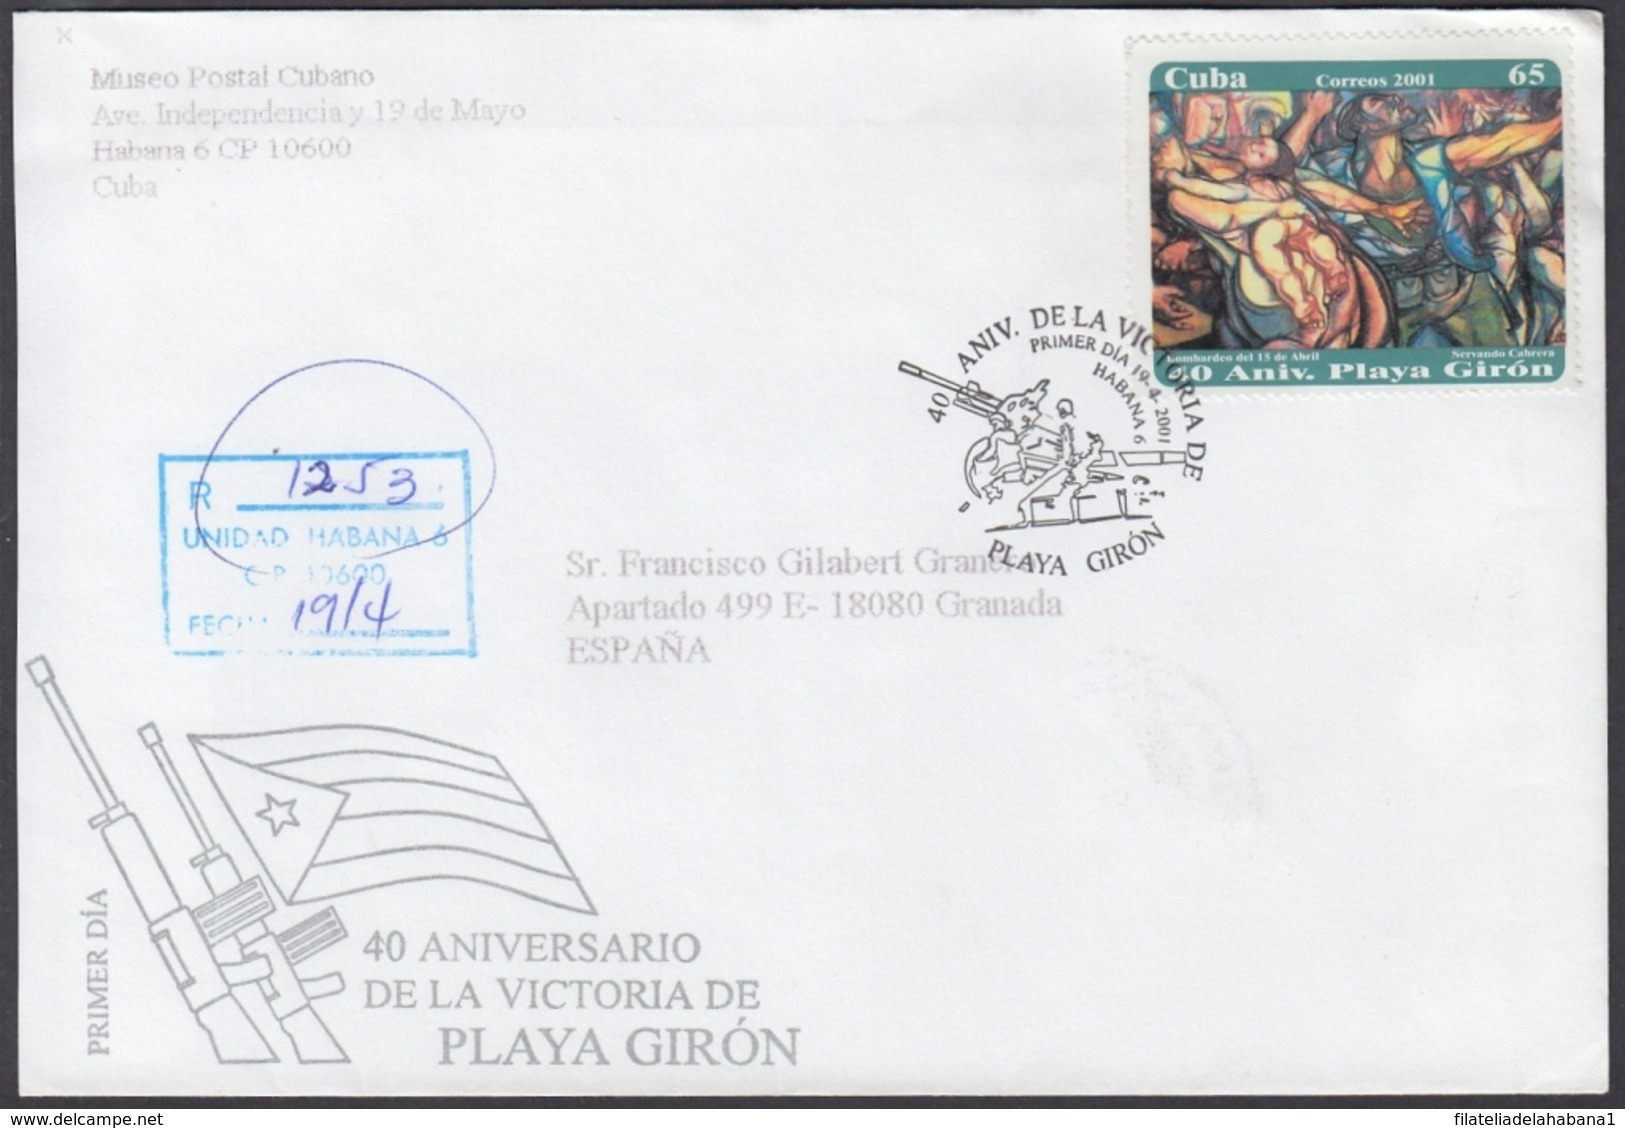 2001-FDC-46 CUBA FDC 2001. REGISTERED COVER TO SPAIN. 40 ANIV PLAYA GIRON, PIG BAY. - FDC